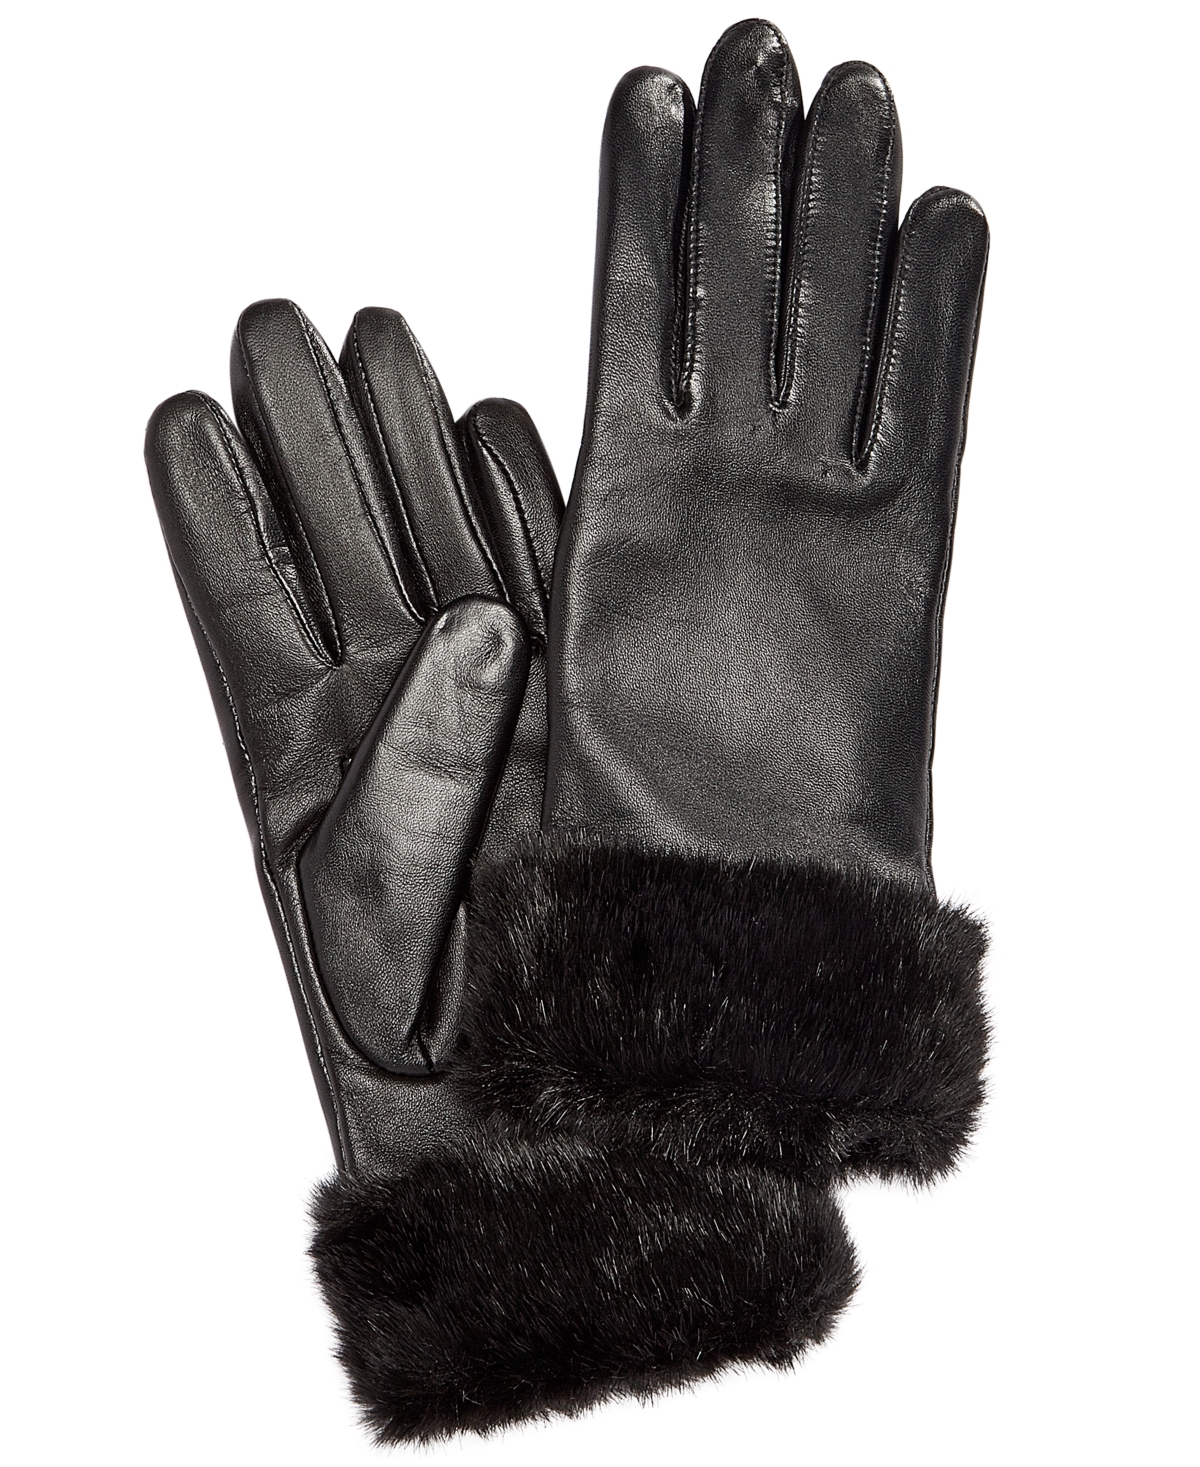 Faux Fur-Cuff Leather Tech Gloves, Created for Macy's - Black